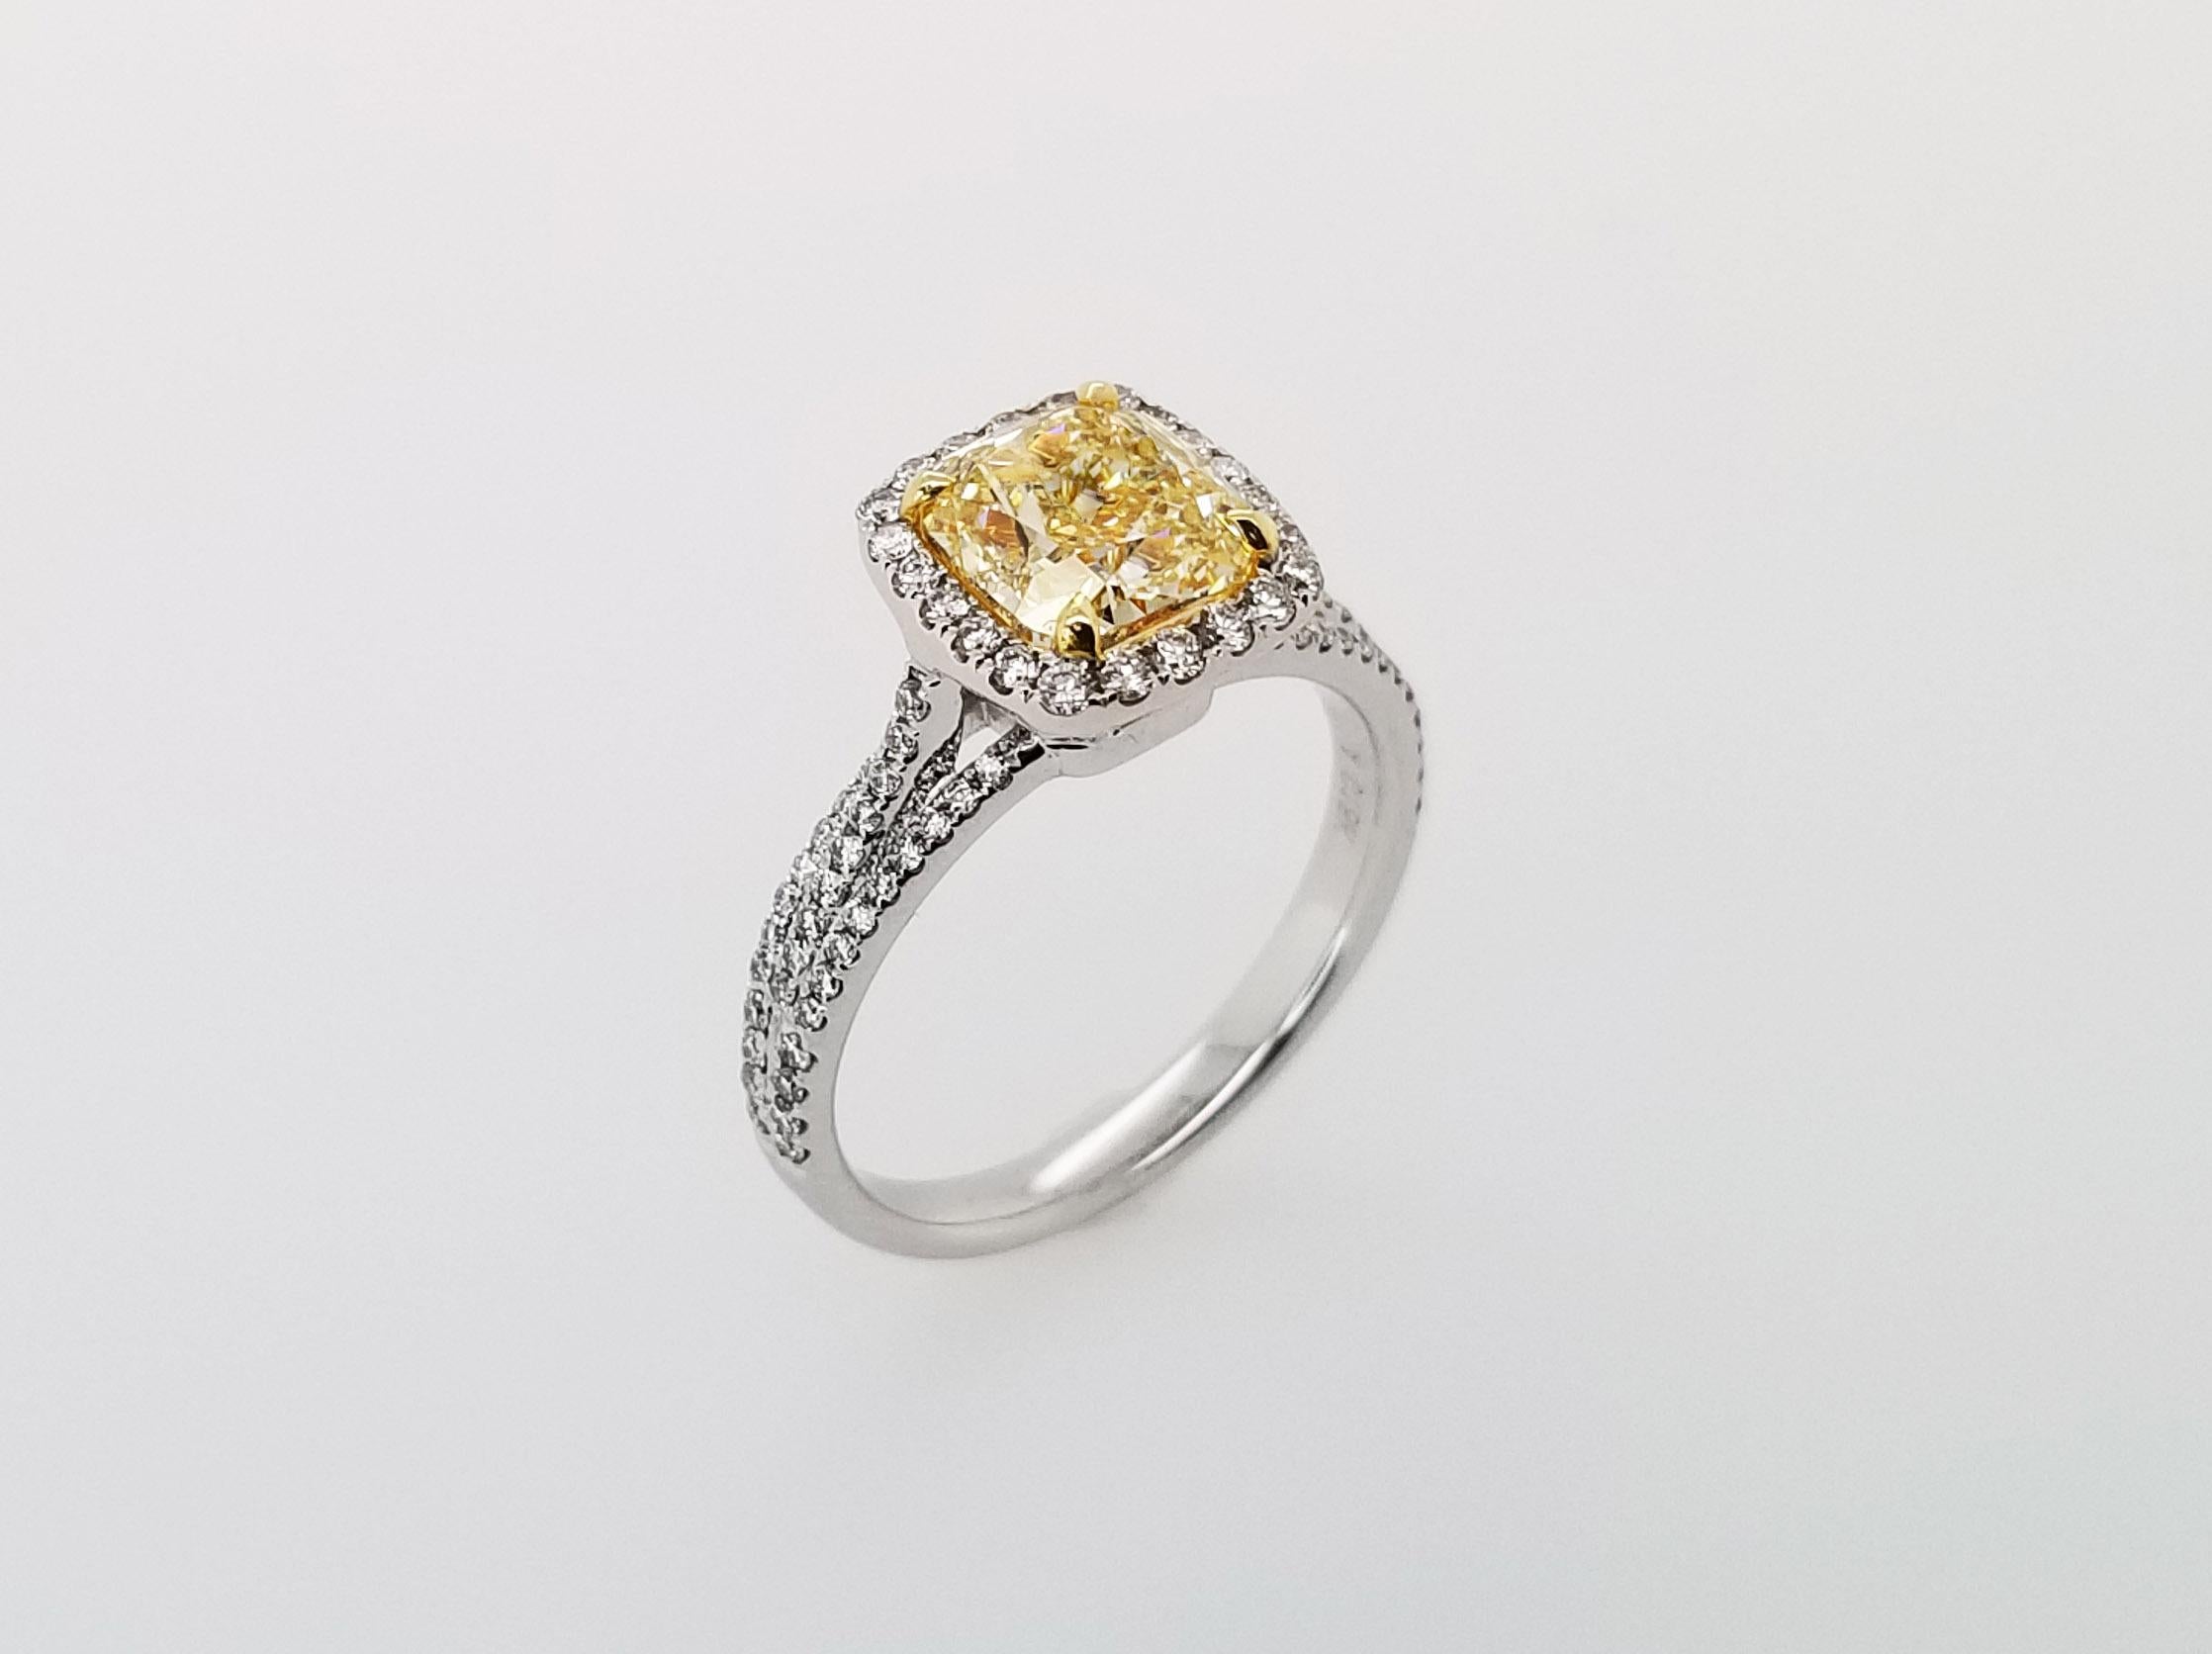 From Scarselli, this beautifully made diamond ring has a center Fancy Yellow cushion cut diamond of 2 carats VS1 clarity GIA certified (see certificate picture for more detailed stone' information), set with 18 karat yellow gold prongs. The 18k